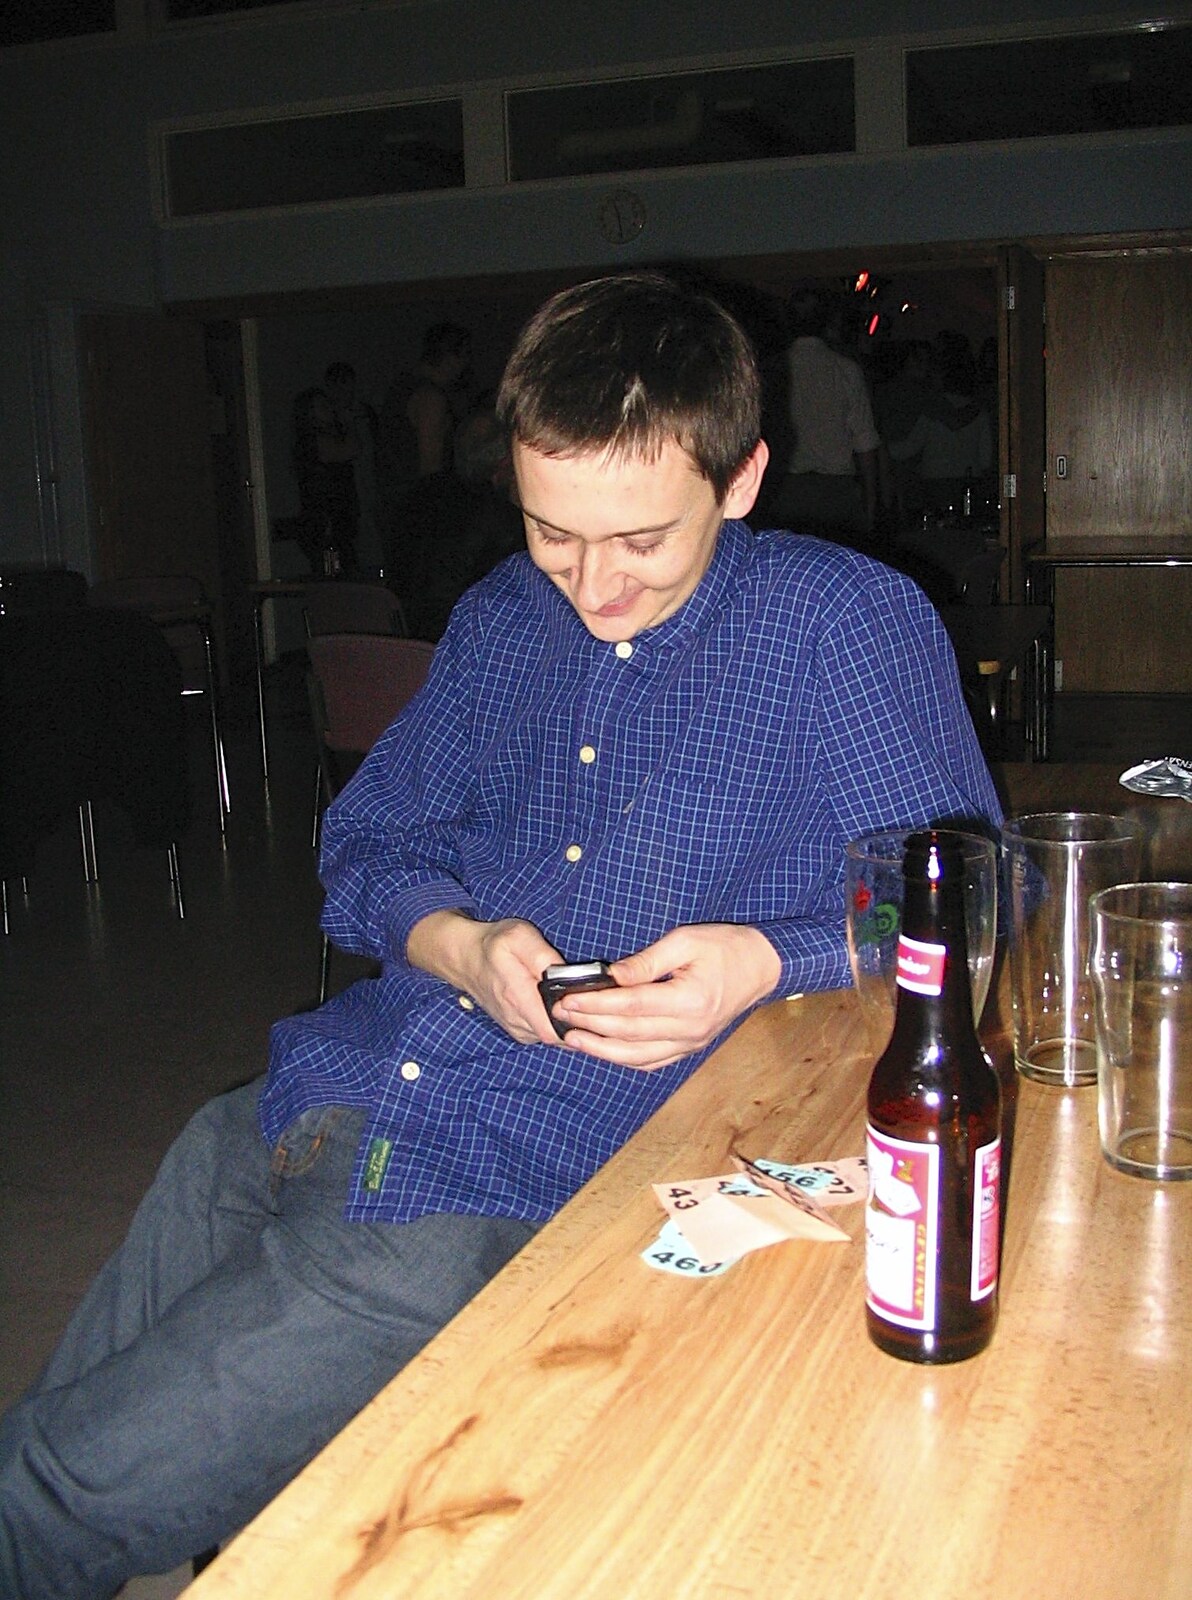 A CISU Blues Festival at the SCC Social Club, and a Million Laptops, Ipswich and Cambridge - 27th November 2004: Andrew does some texting too